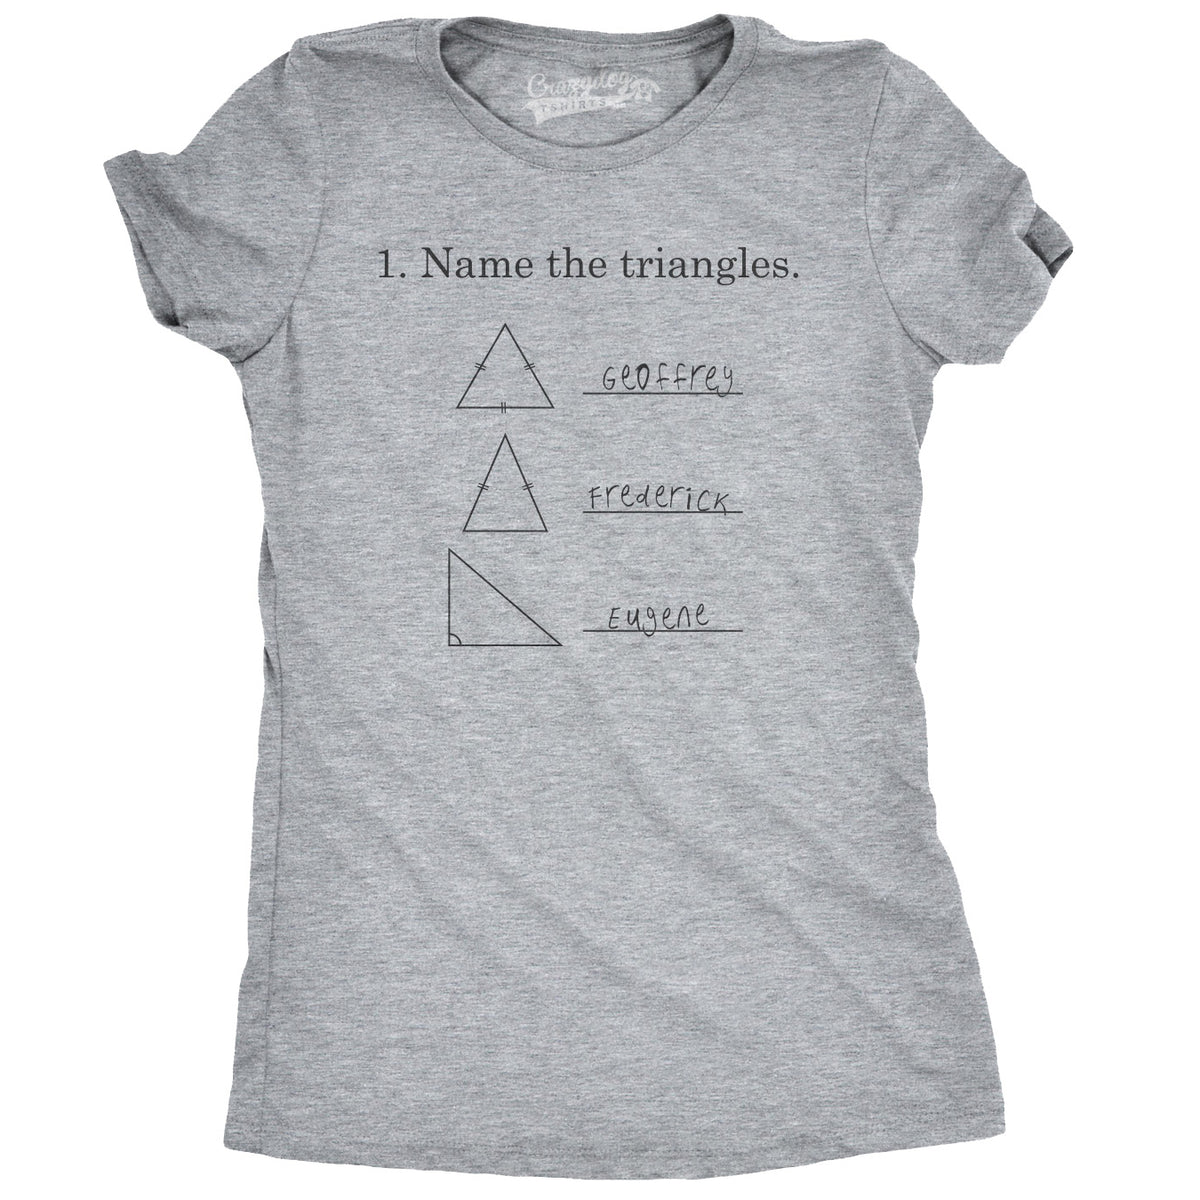 Funny Dark Heather Grey Name The Triangles Womens T Shirt Nerdy Science Sarcastic Tee